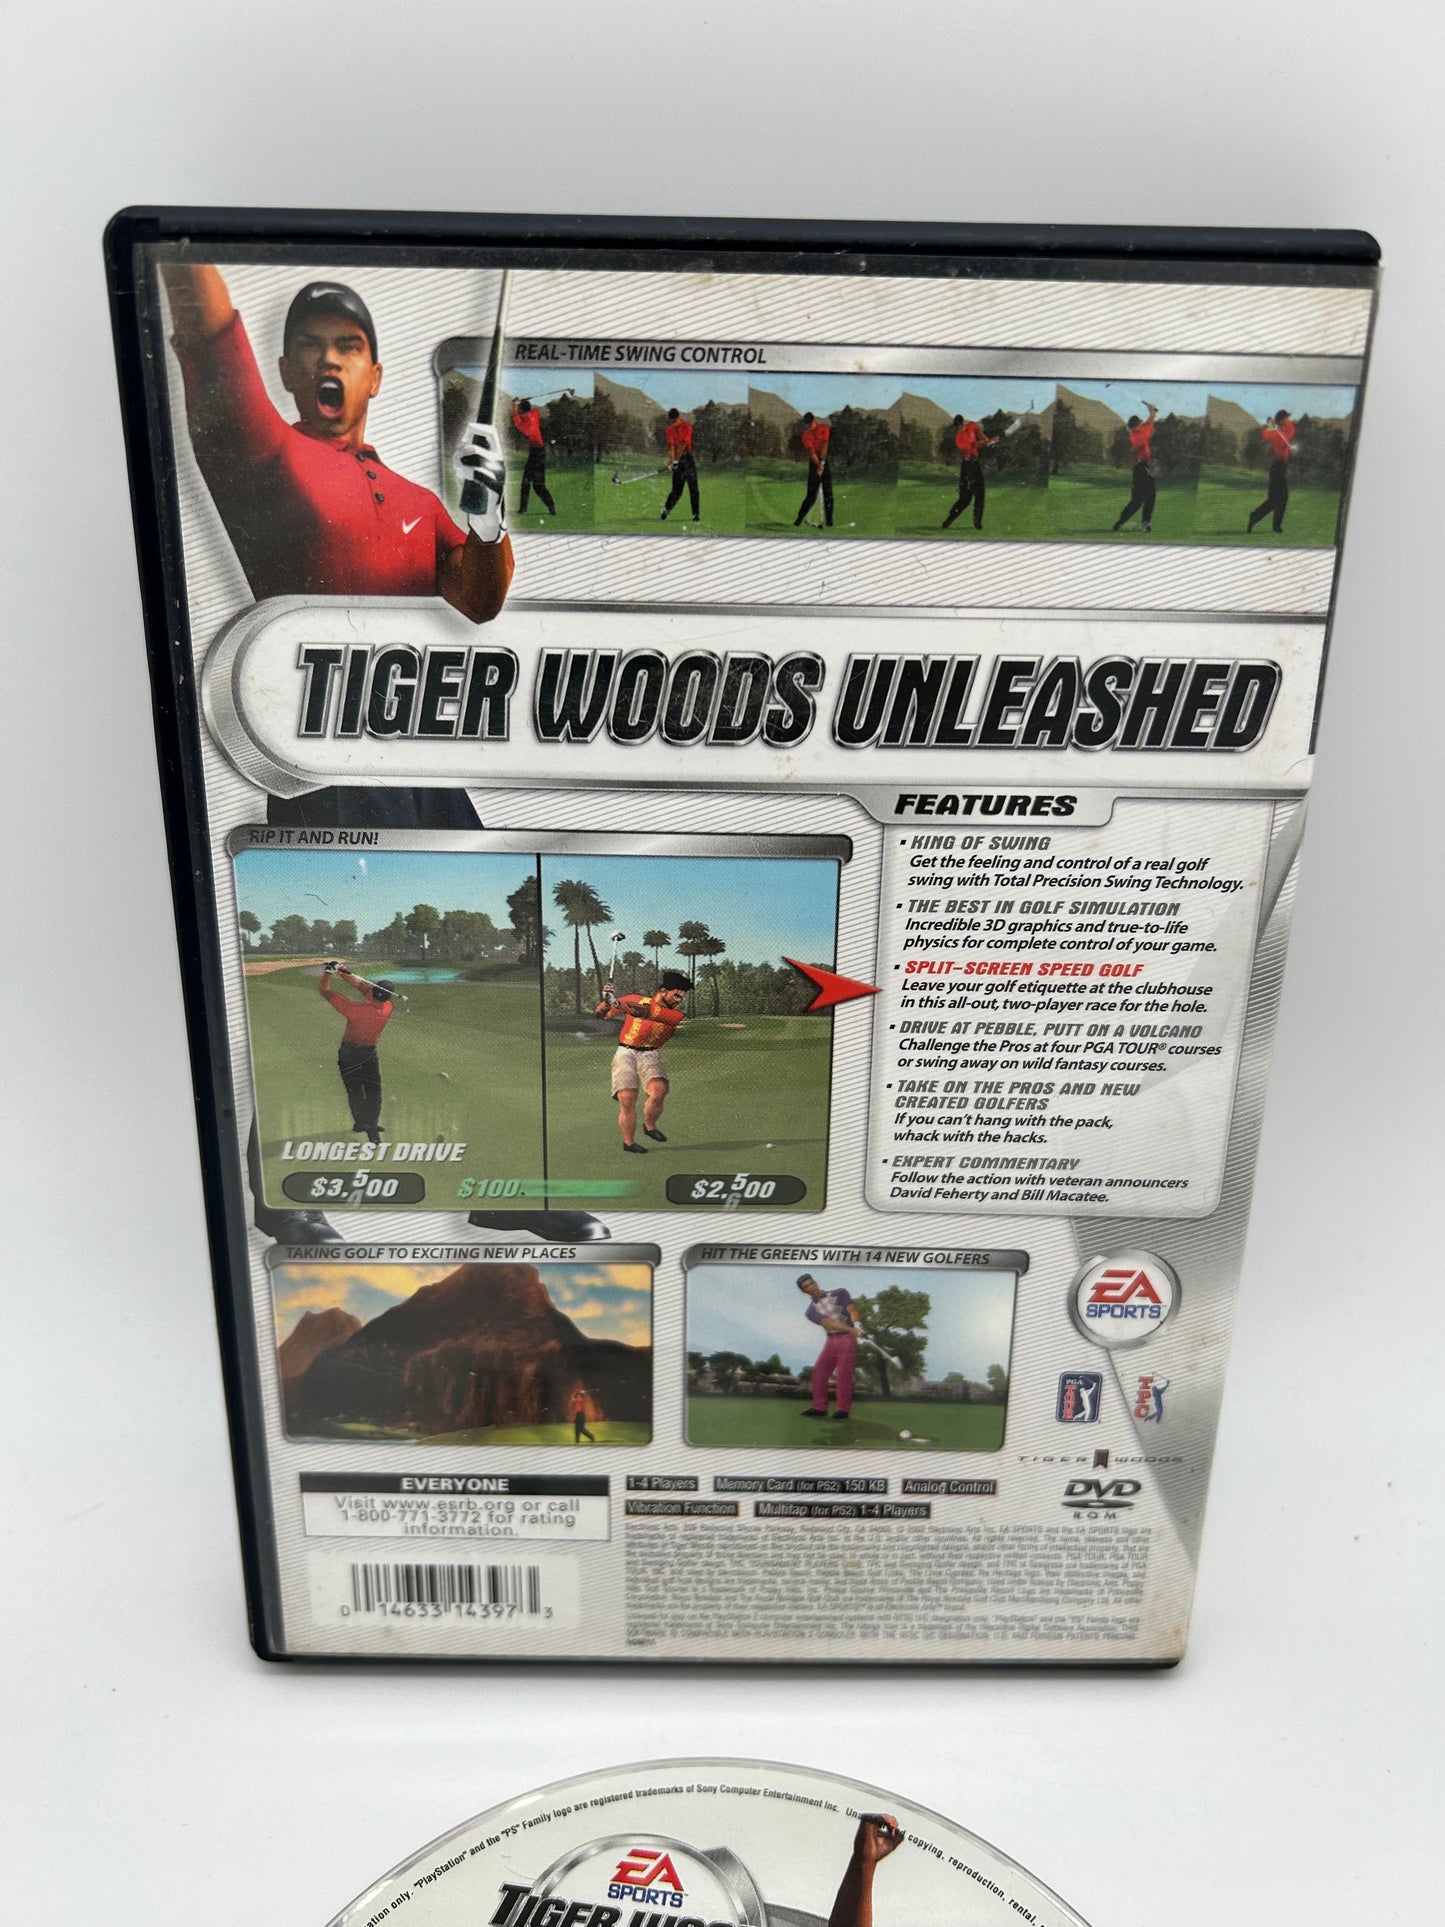 SONY PLAYSTATiON 2 [PS2] | TiGER WOODS PGA TOUR 2002